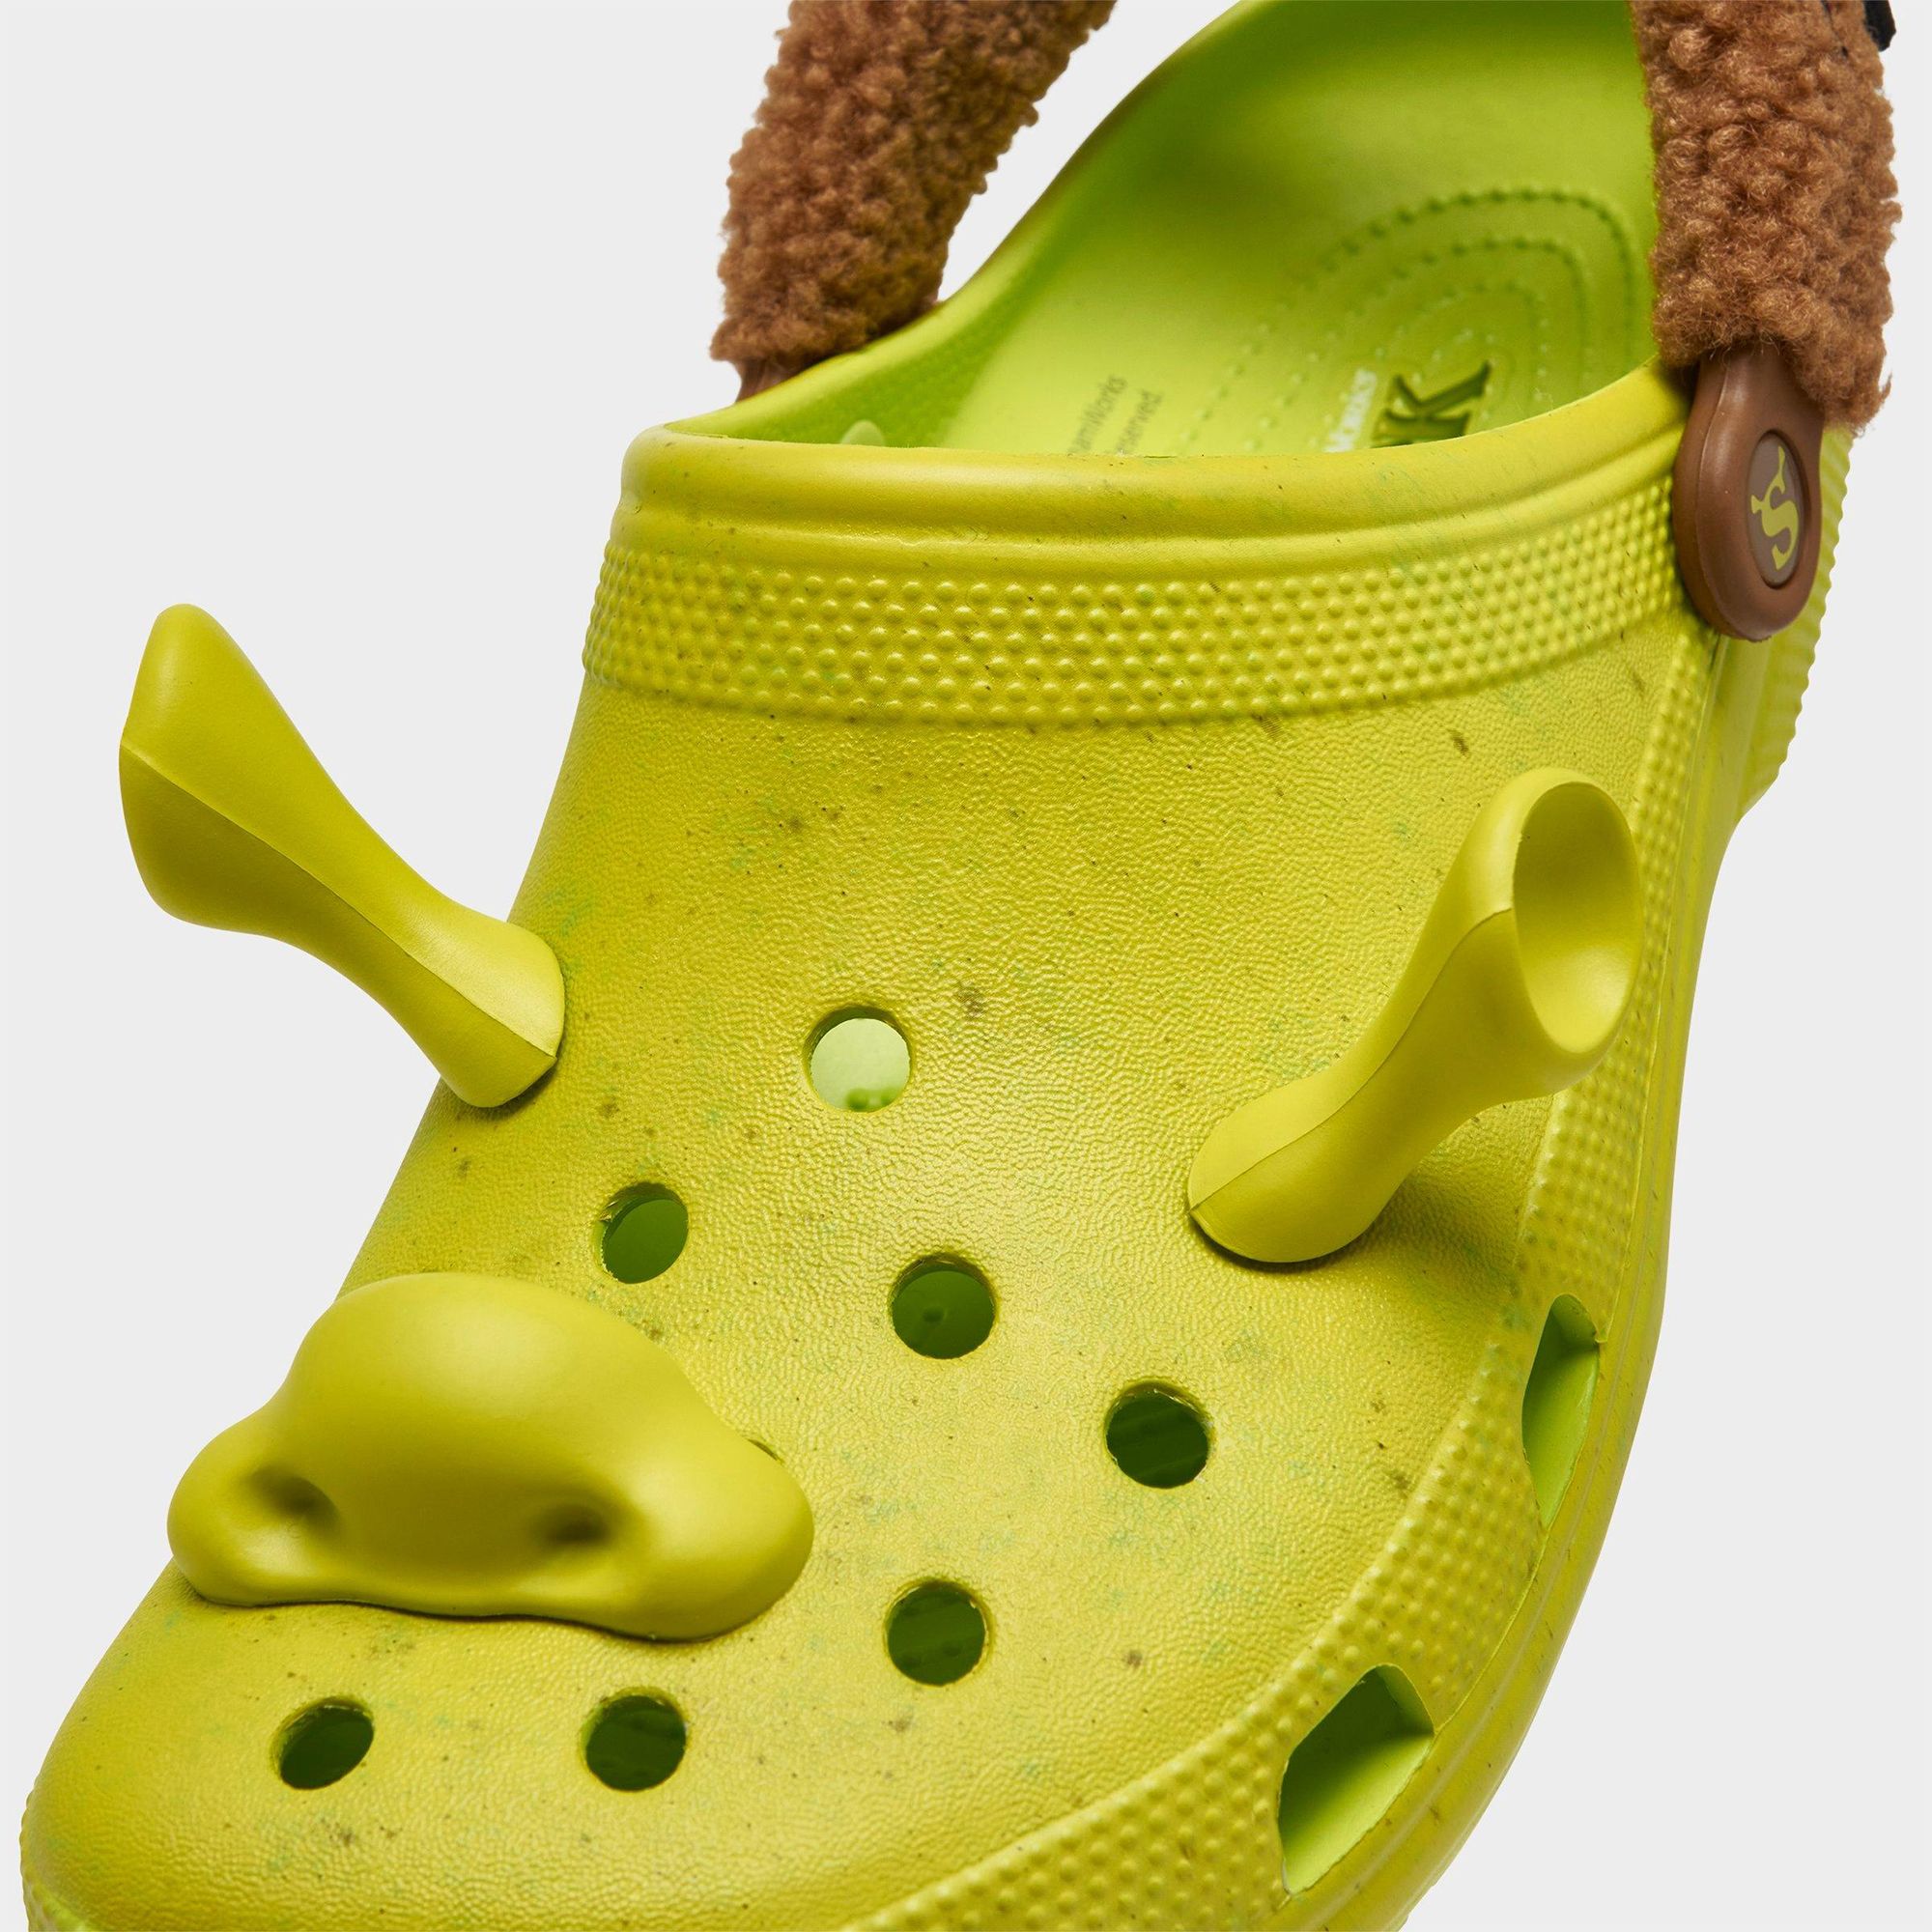 Crocs x Shrek Clogs Collab: Release Date, How to Buy Online – The Hollywood  Reporter